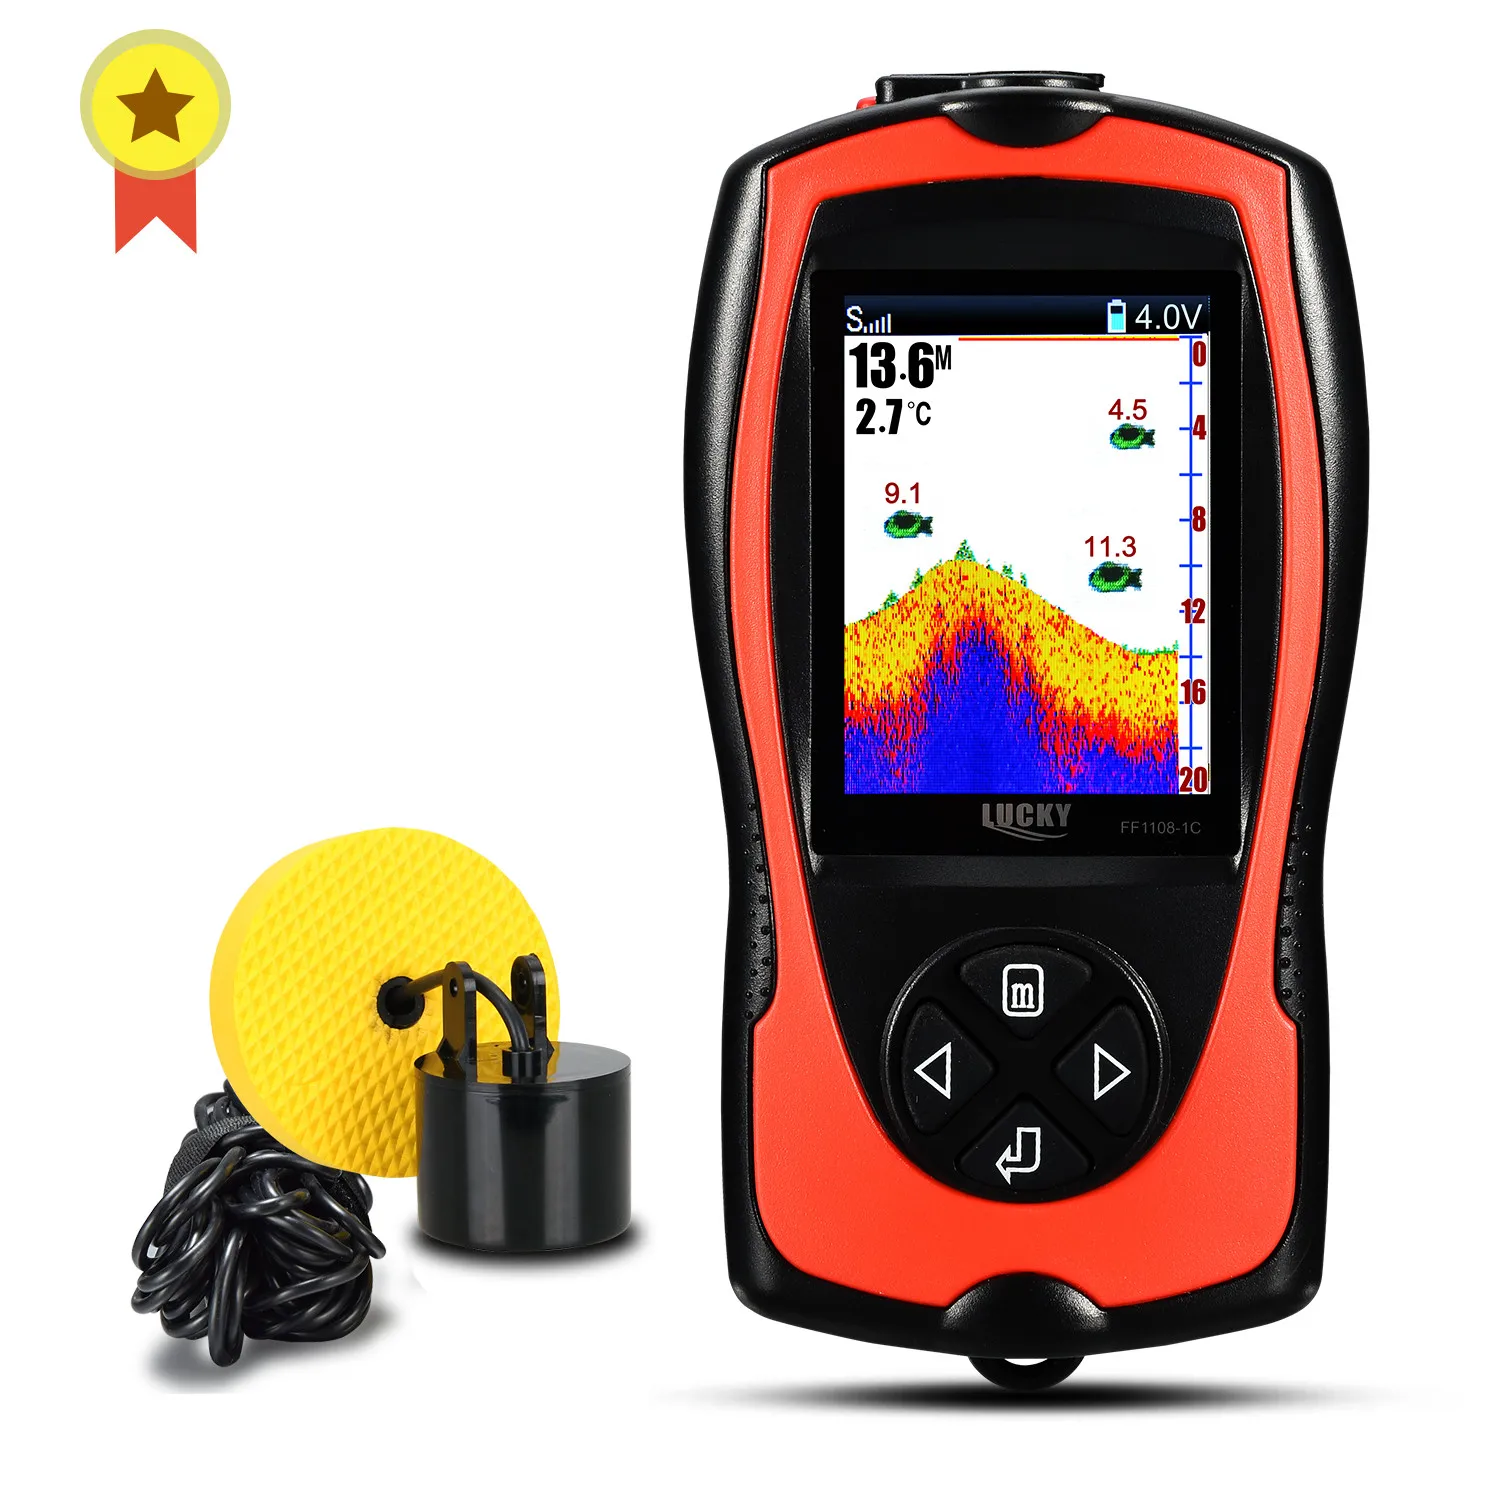 Lucky FF1108-1CT Wired High definition color fish finder depth 100M echo sounder fishing tackle